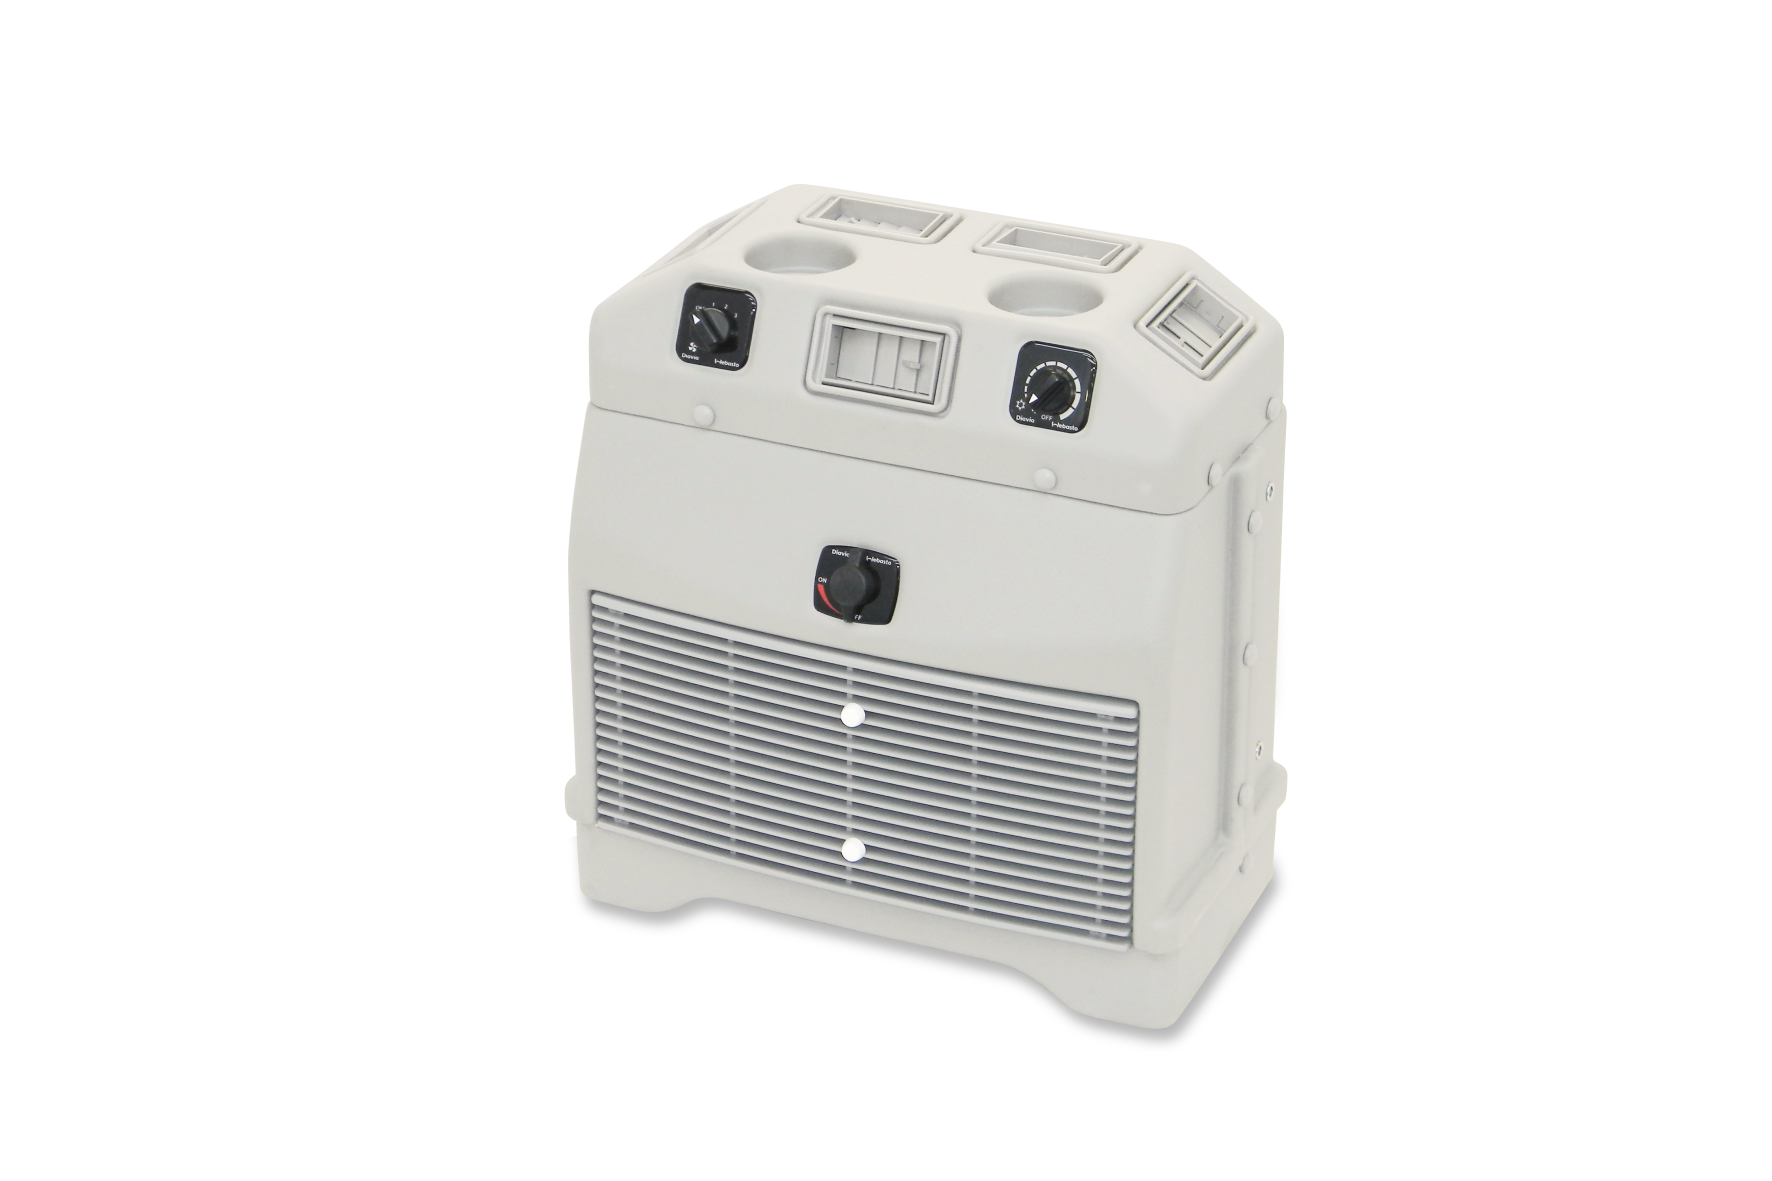 Product picture of Webasto integrated air-conditioning system model Norway